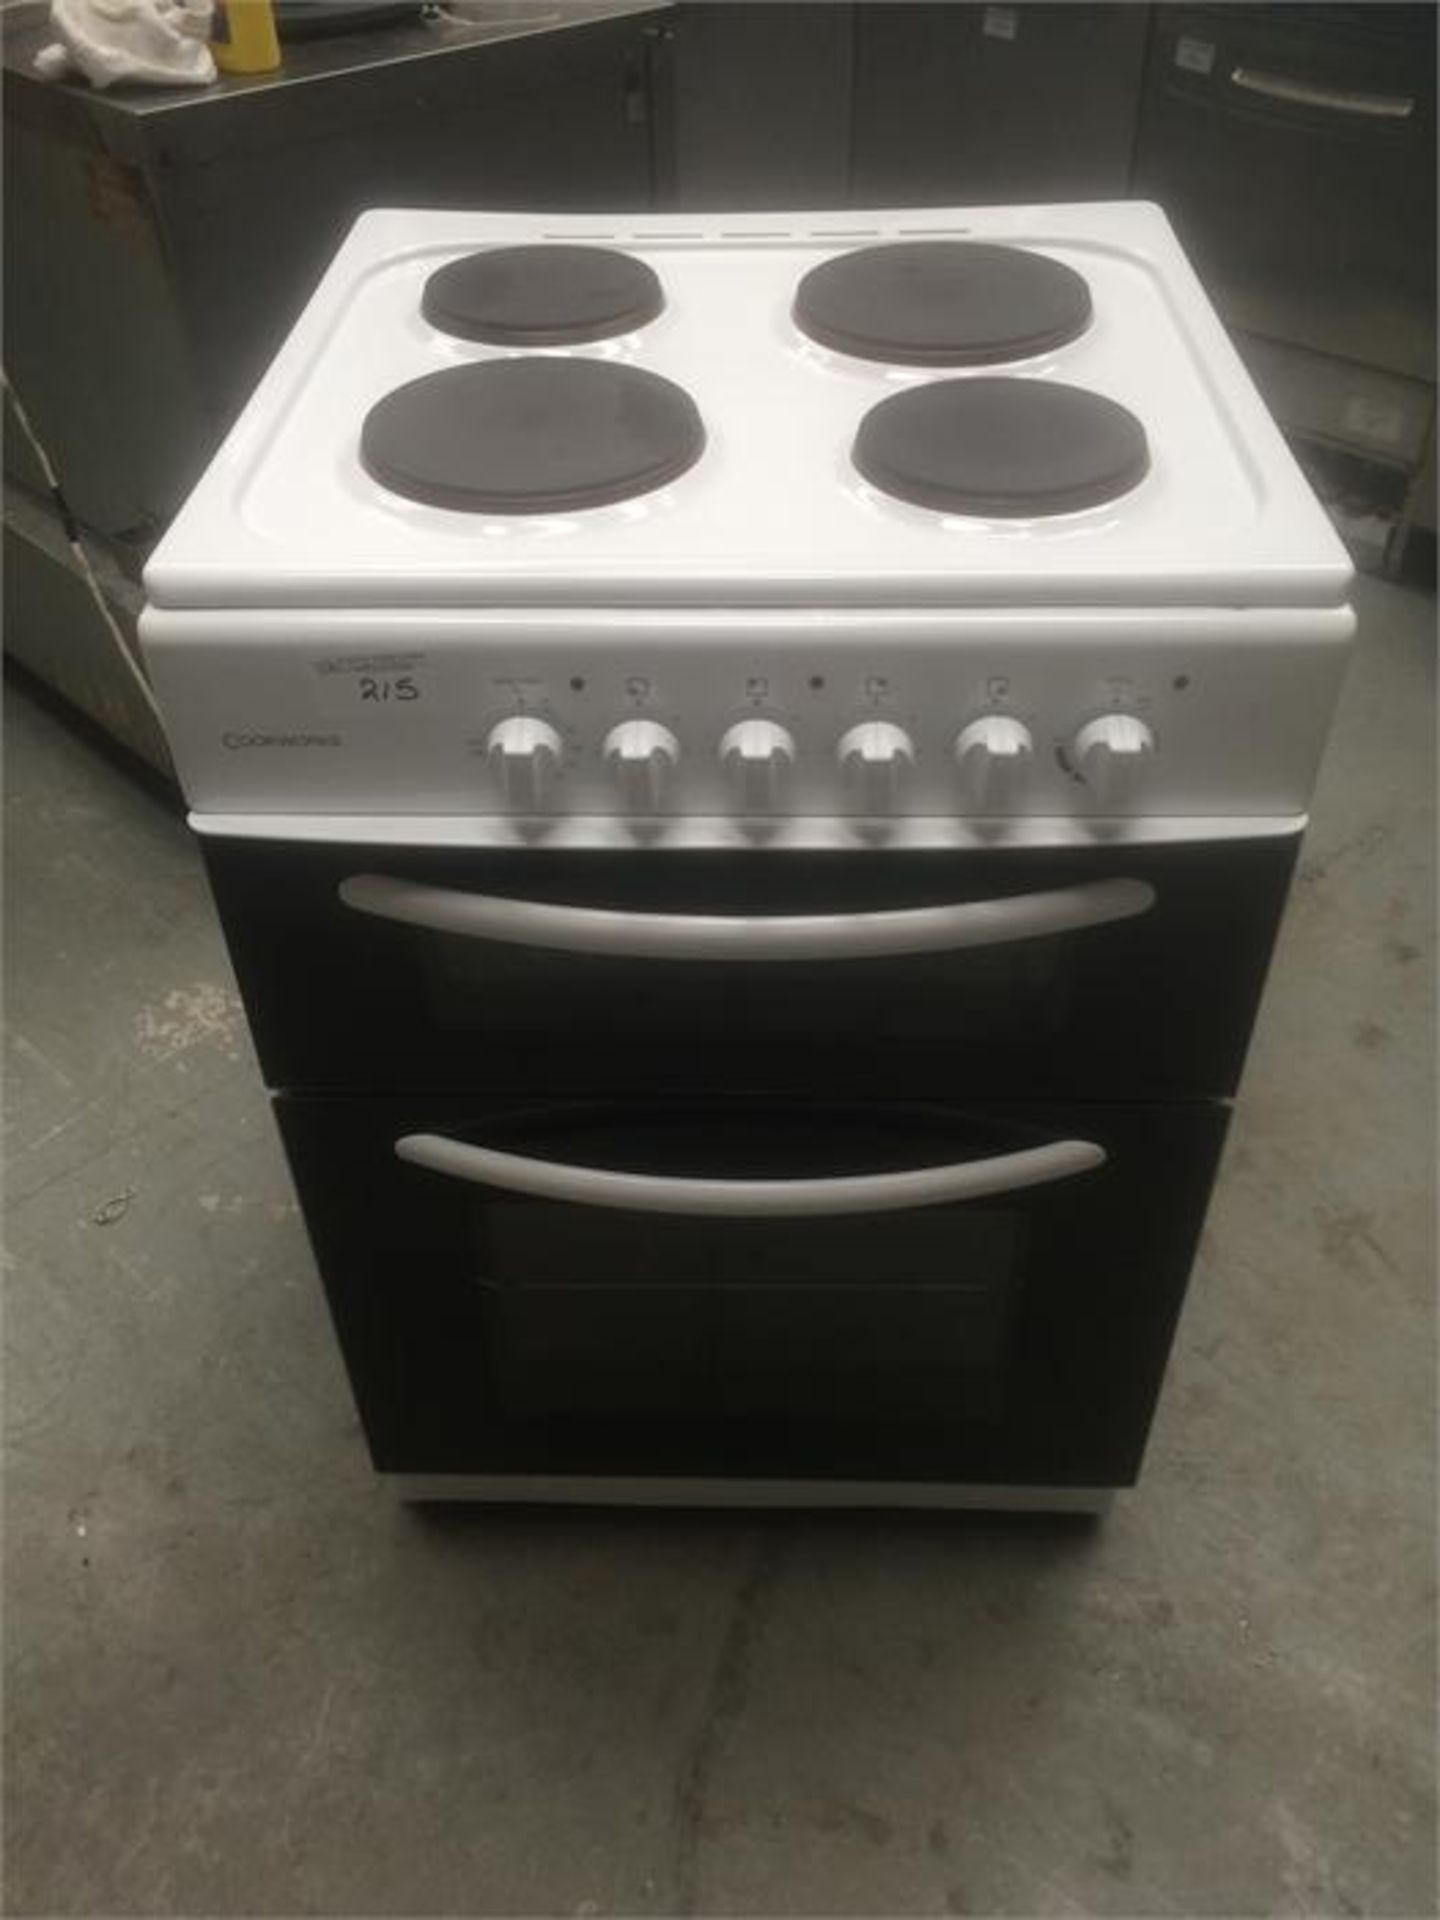 Cookworks, 4 Ring Electric Domestic Cooker 600